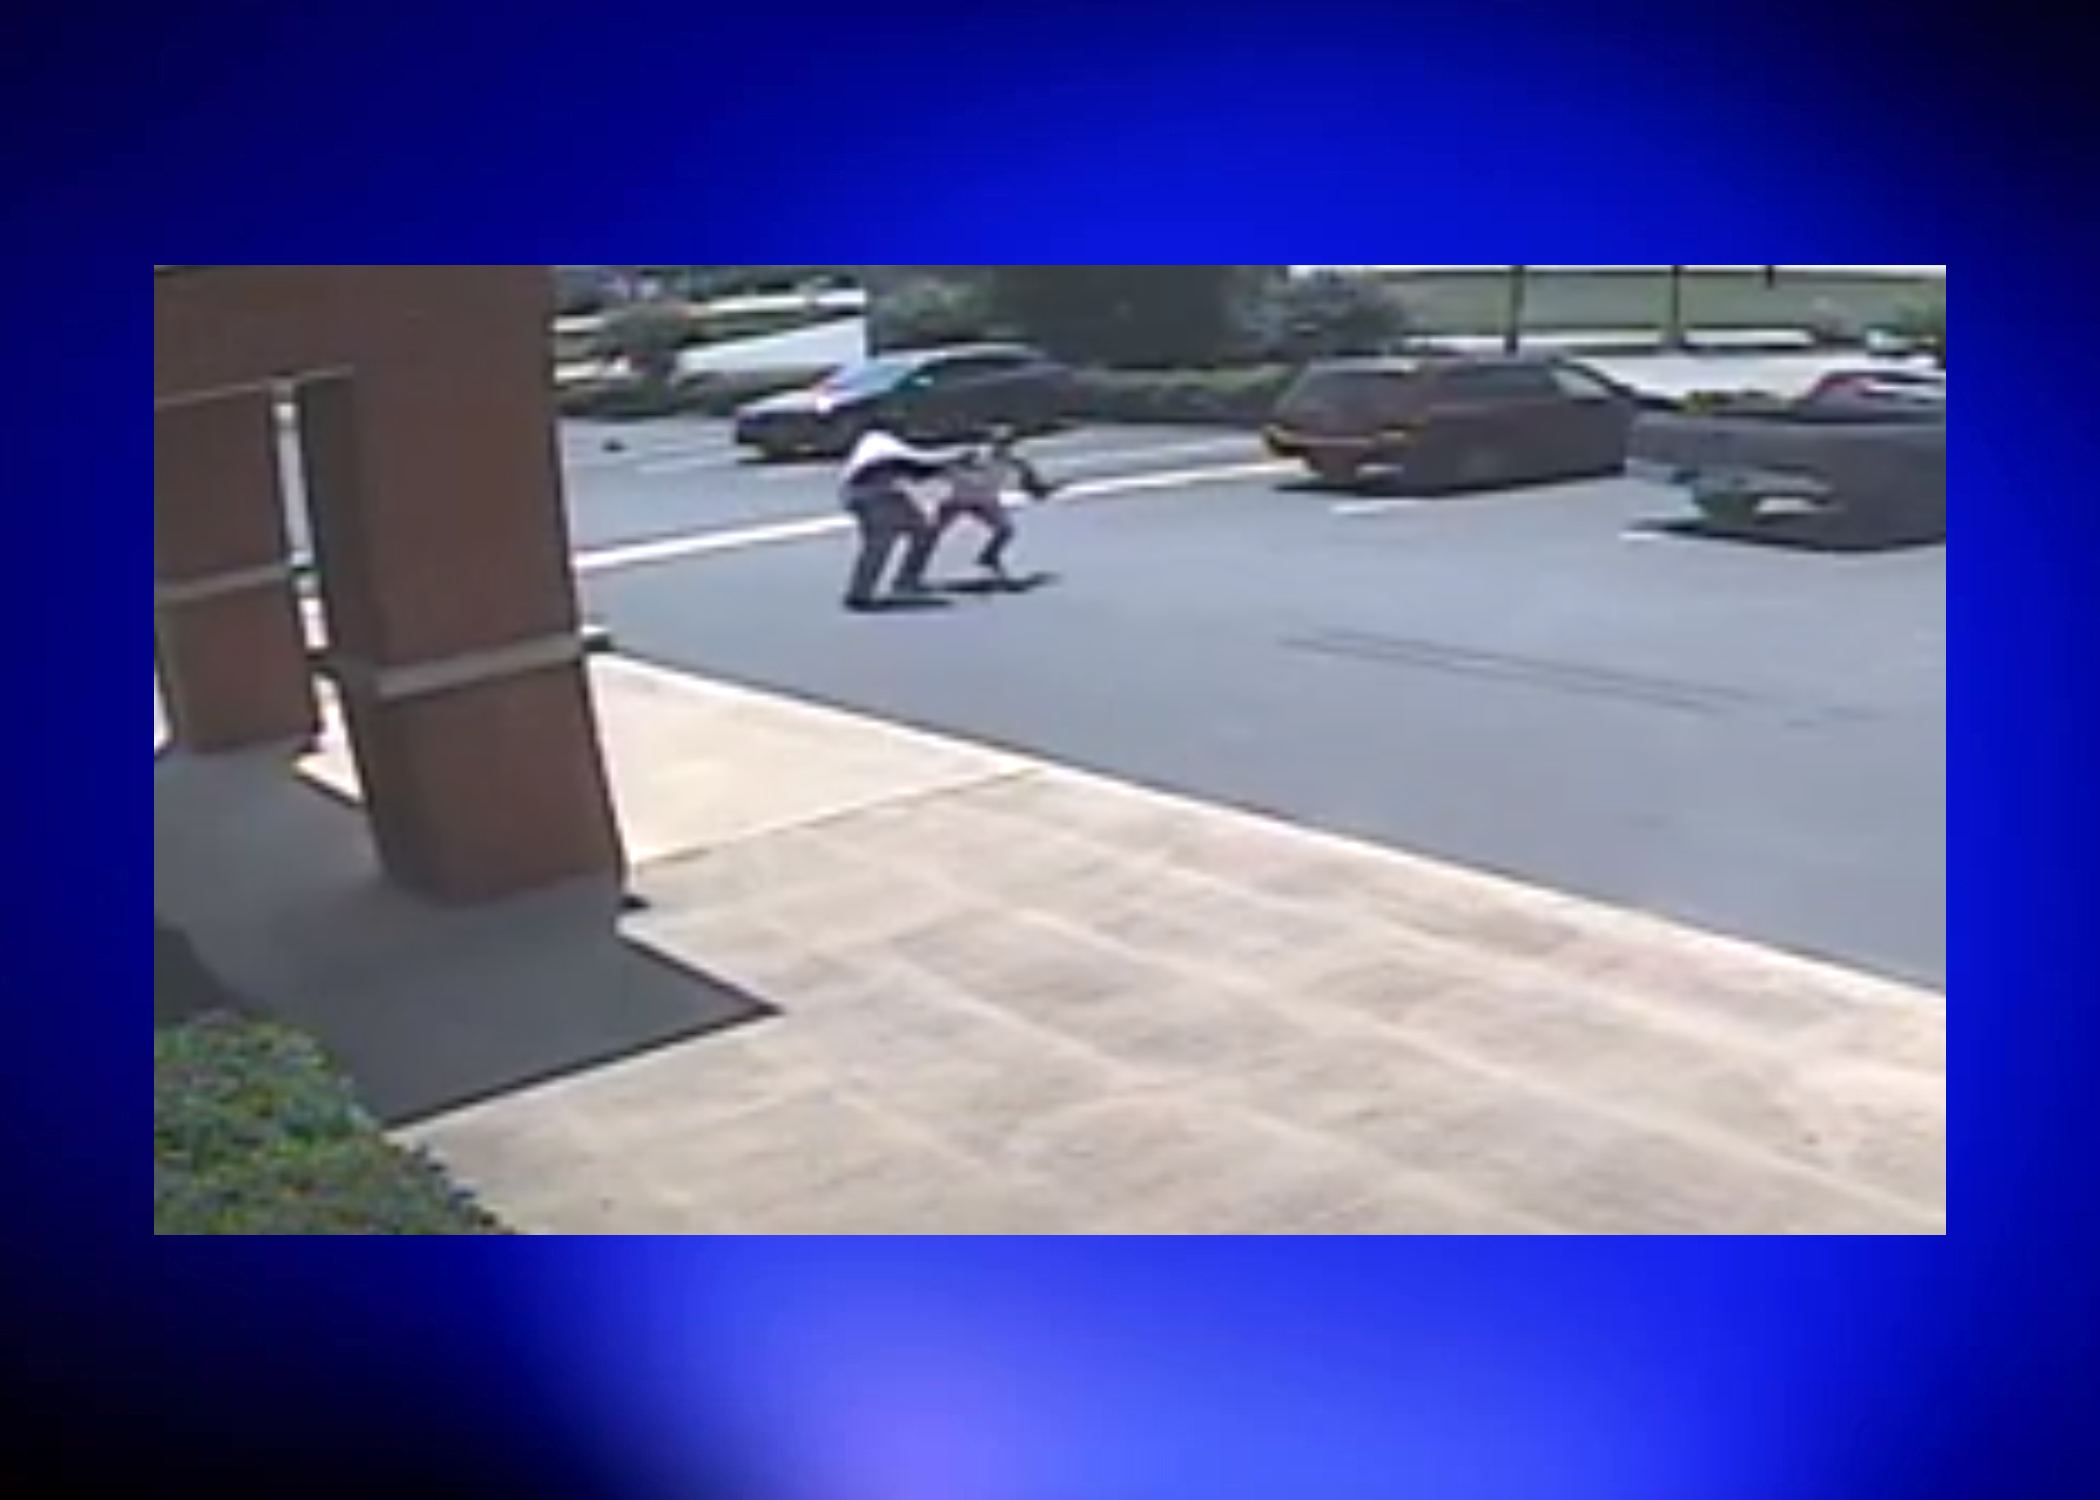 VIDEO: Customer robbed in parking lot of Trussville bank